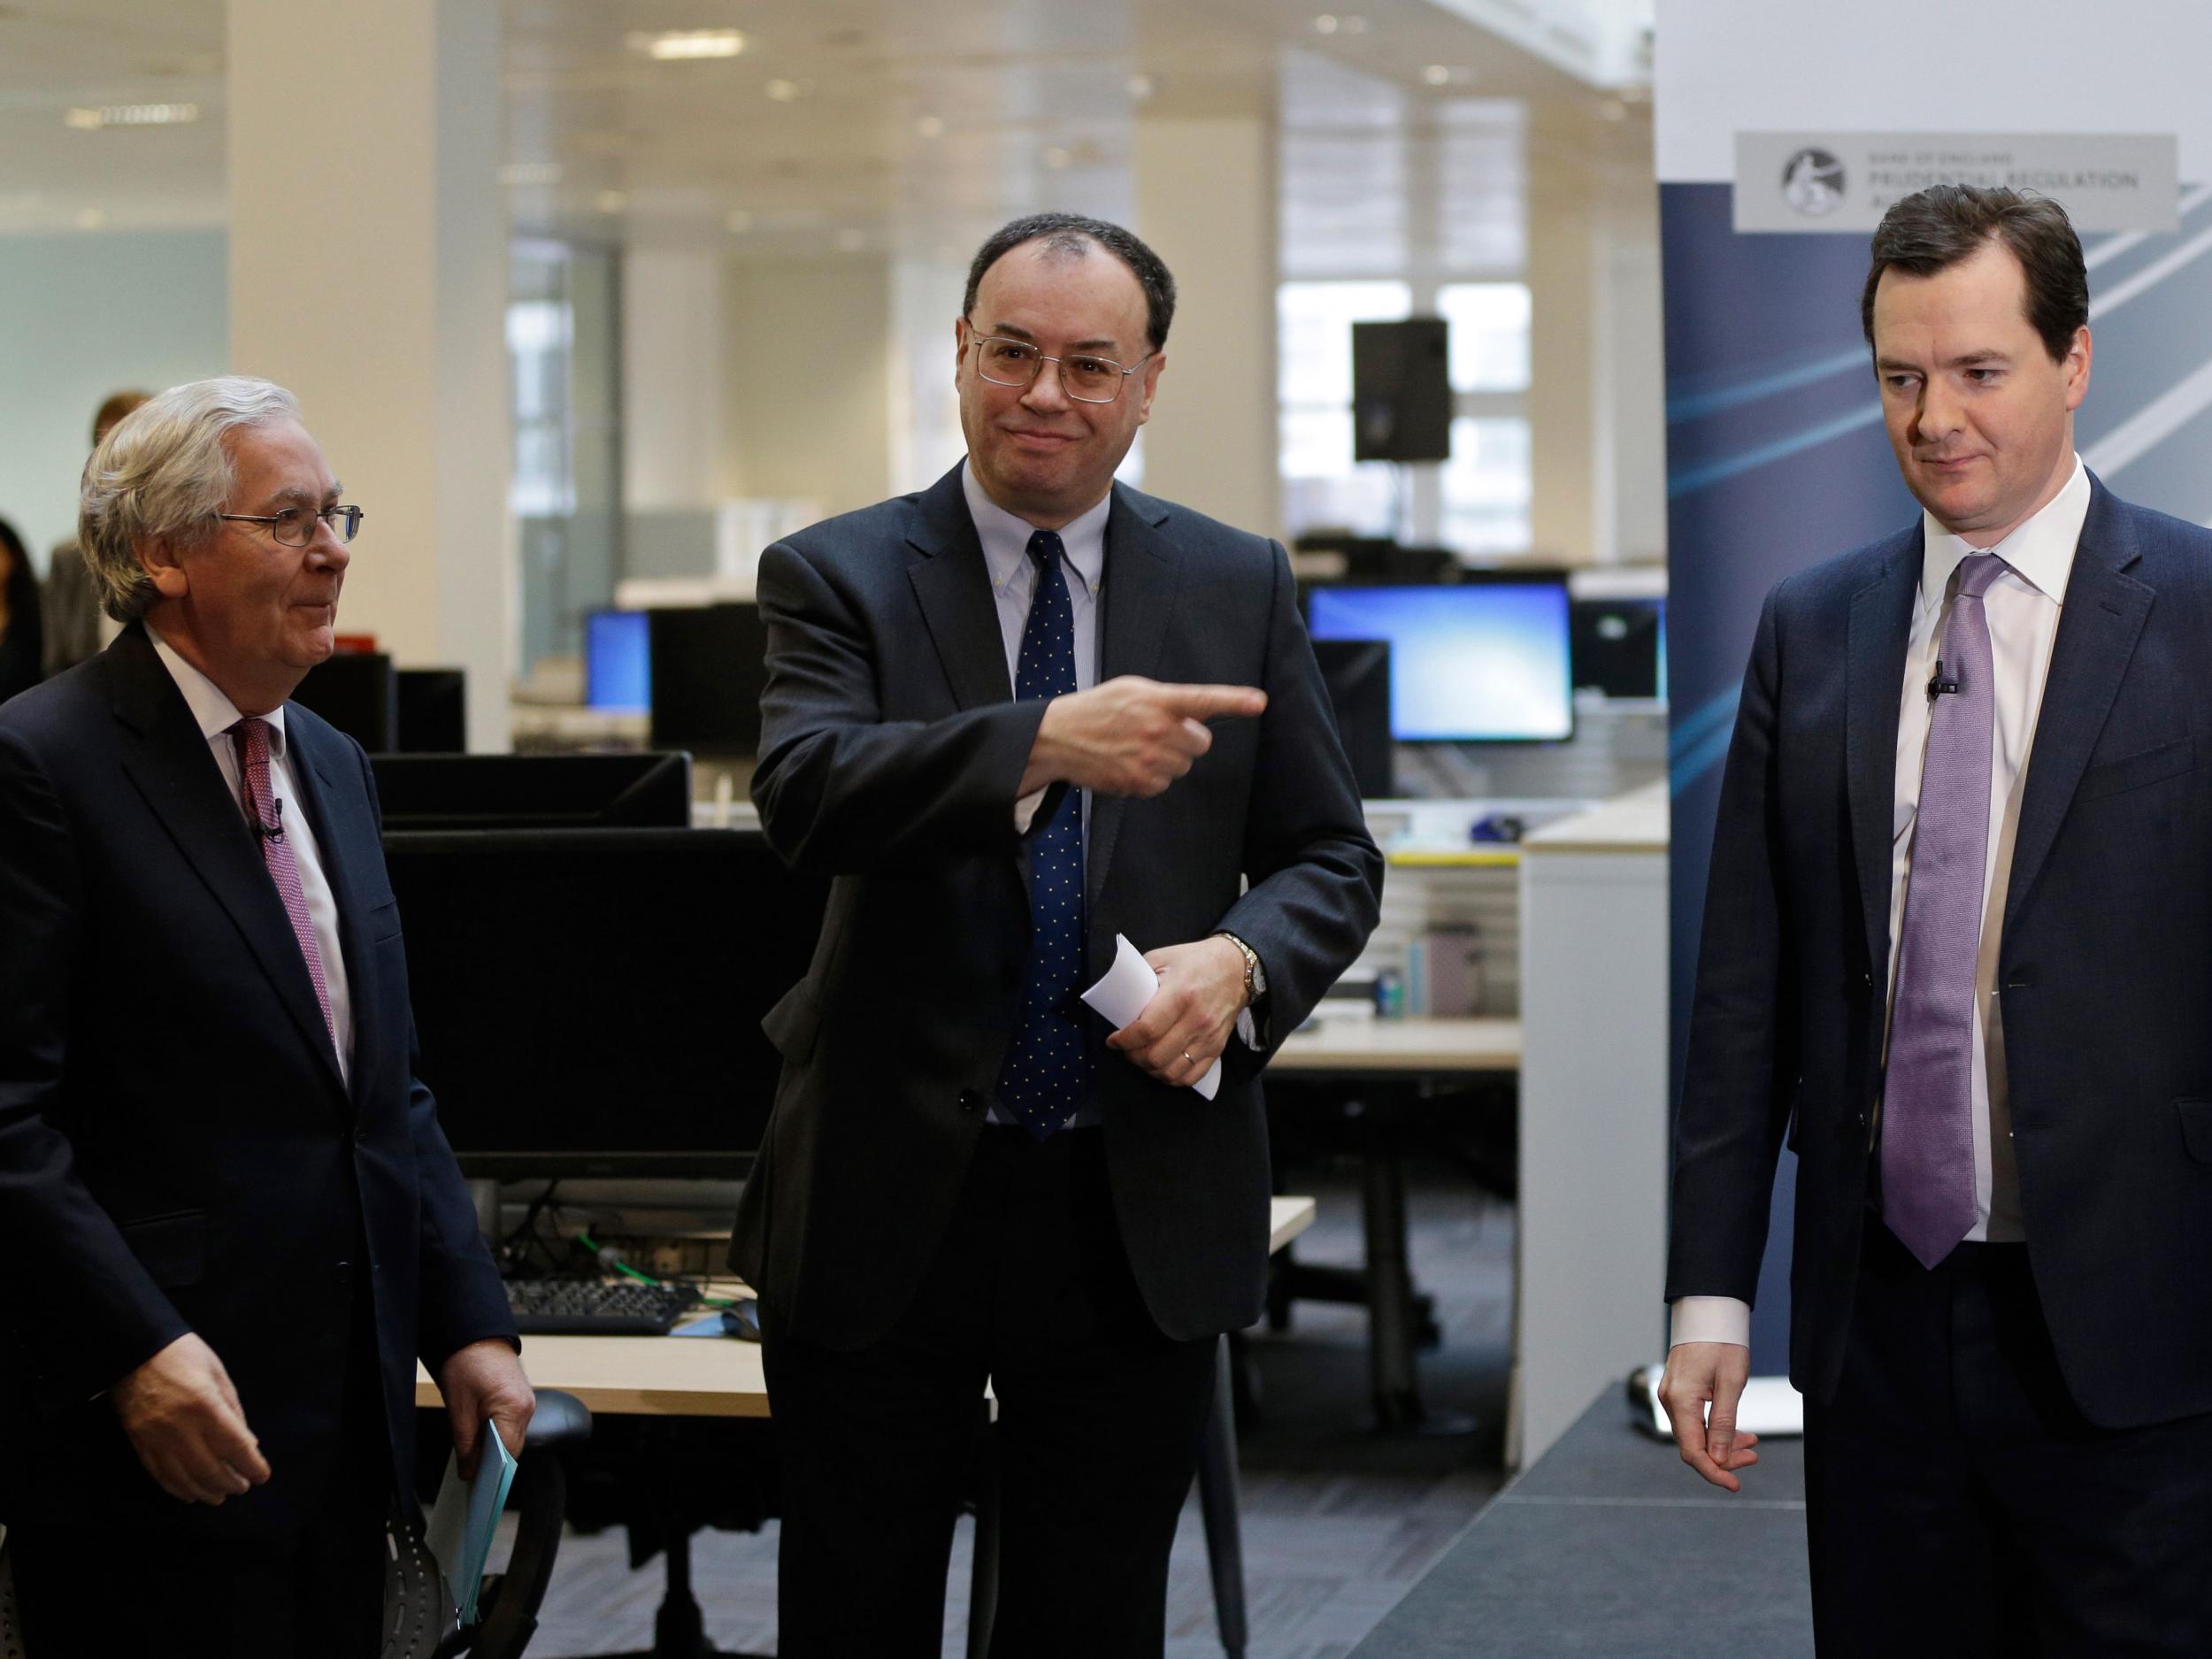 Andrew Bailey, center, the Chief Executive of the Prudential Regulation Authority (PRA), points to the exit next to the Chancellor of the Exchequer George Osborne and the Governor of the Bank of England Mervyn King during the opening of the PRA on April 2, 2013 in London, England.